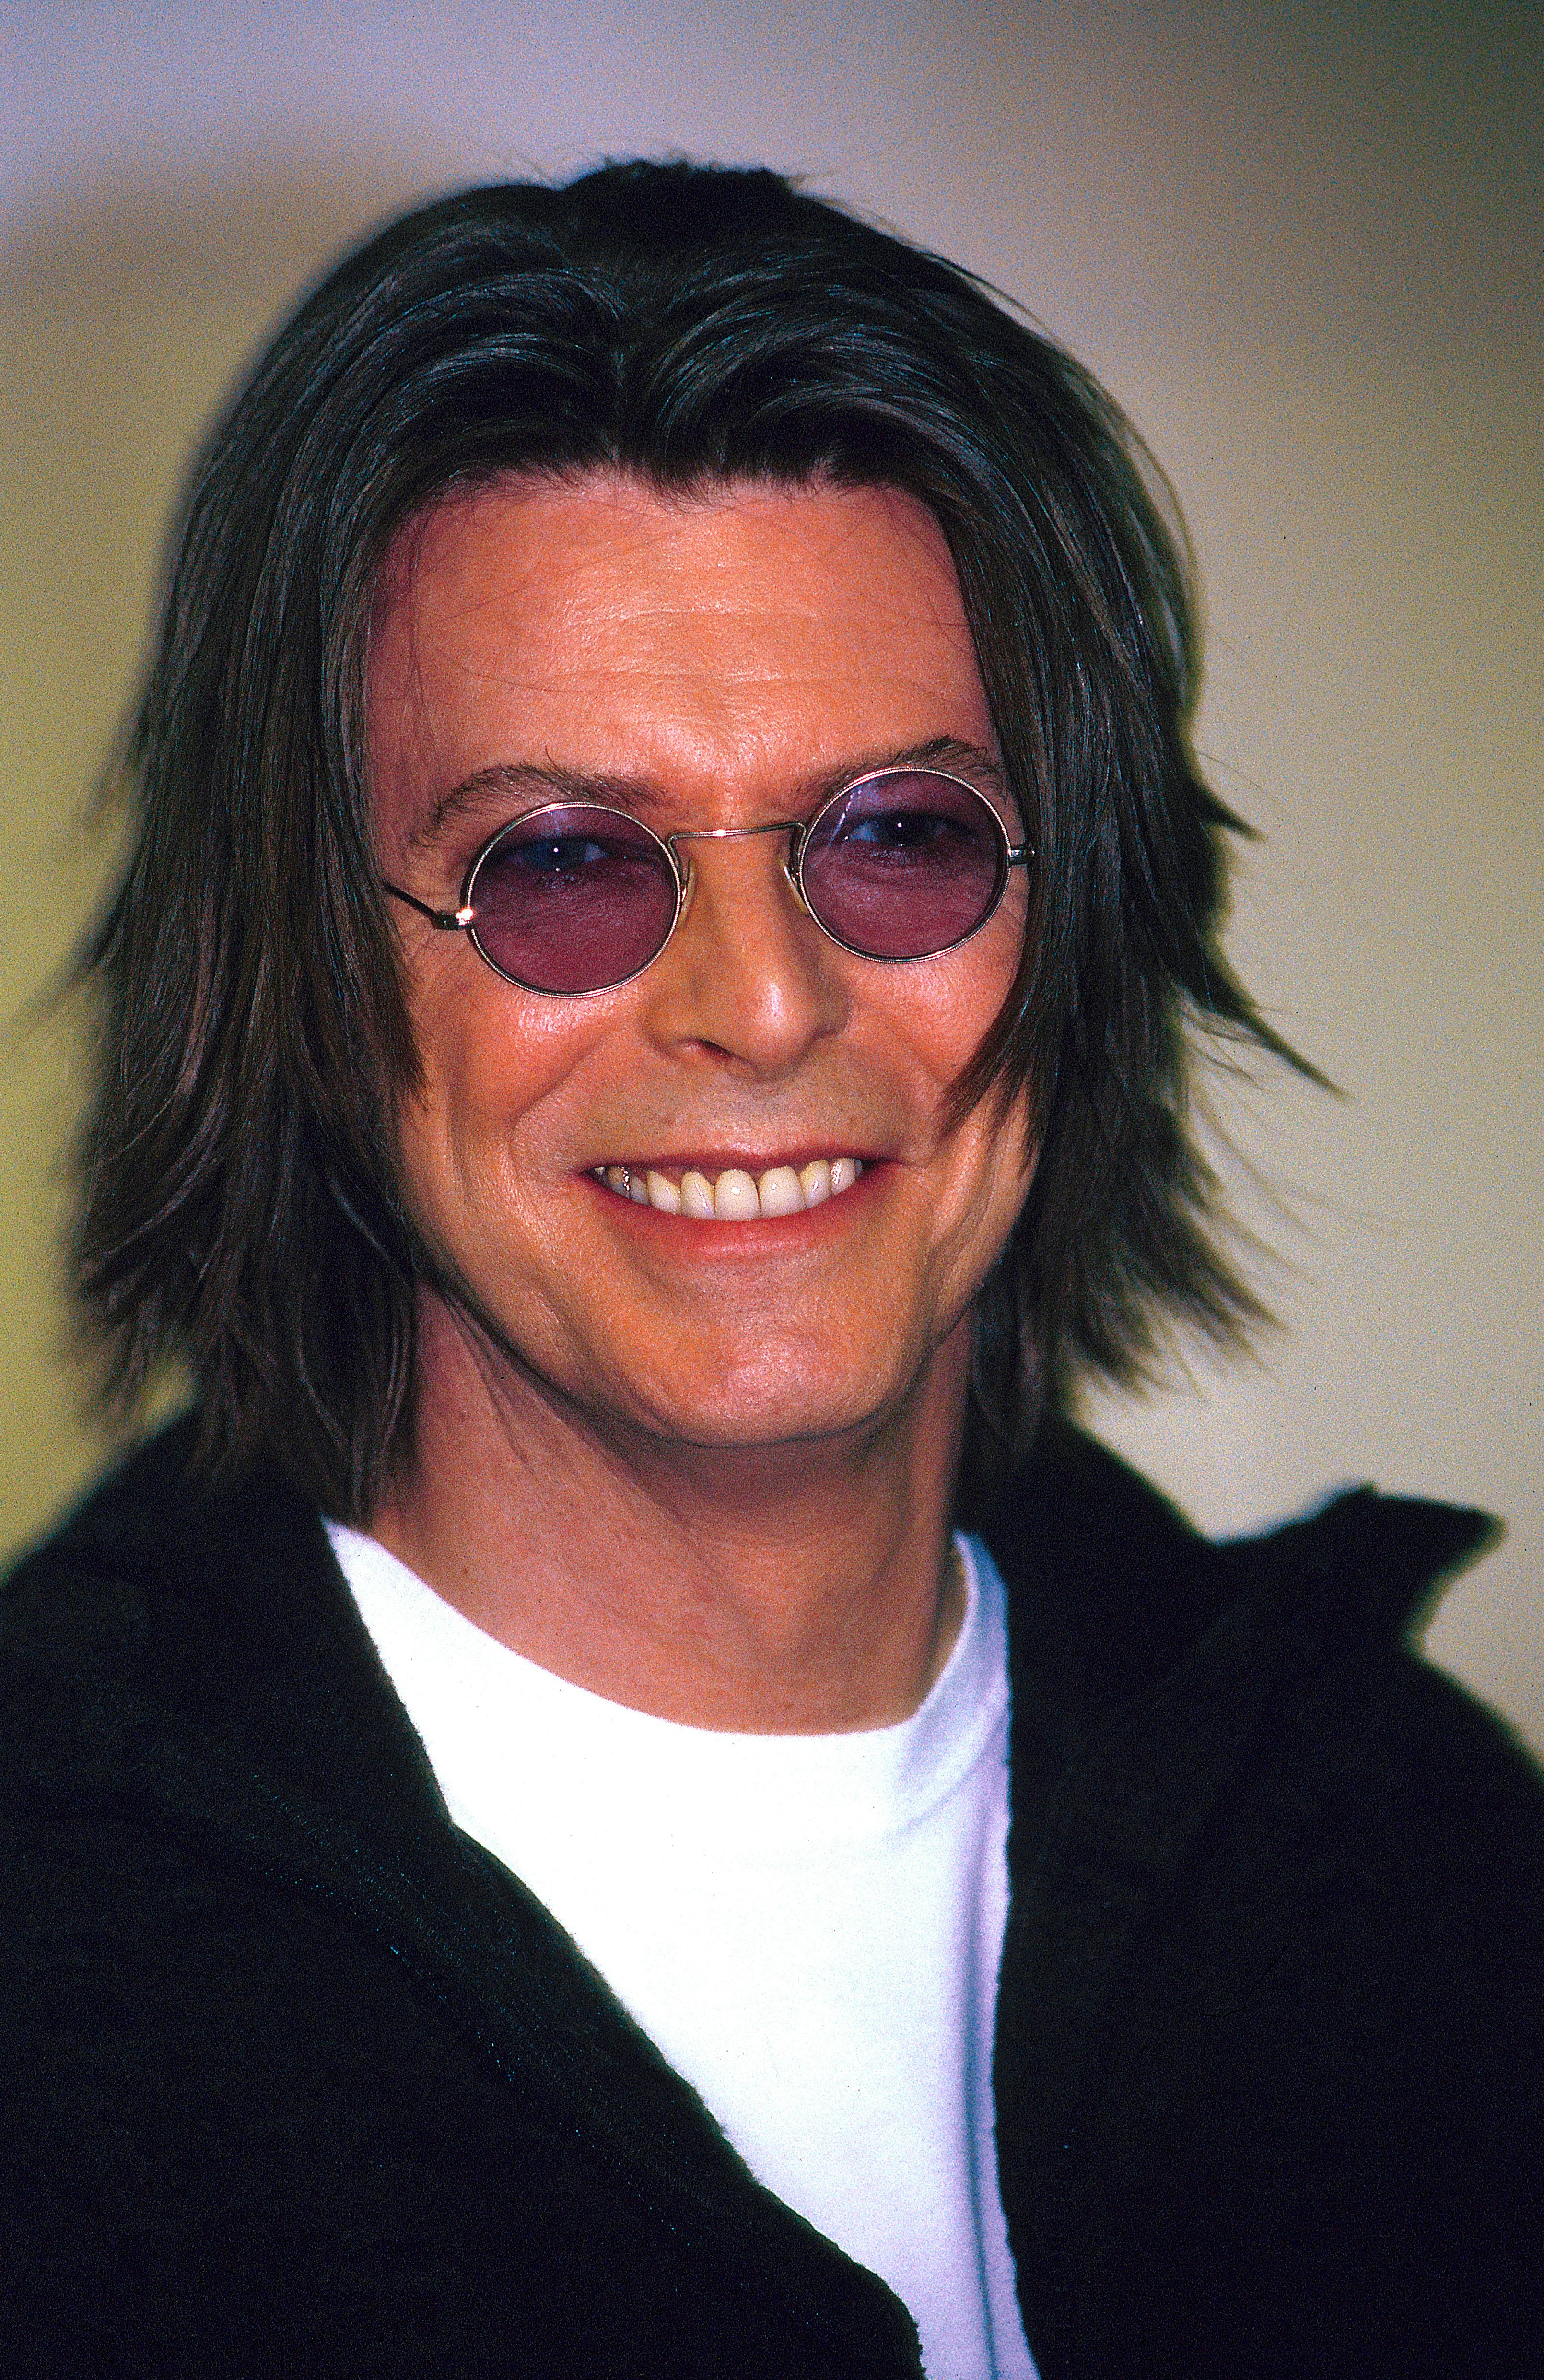 13 David Bowie Looks You Forgot About PHOTOS